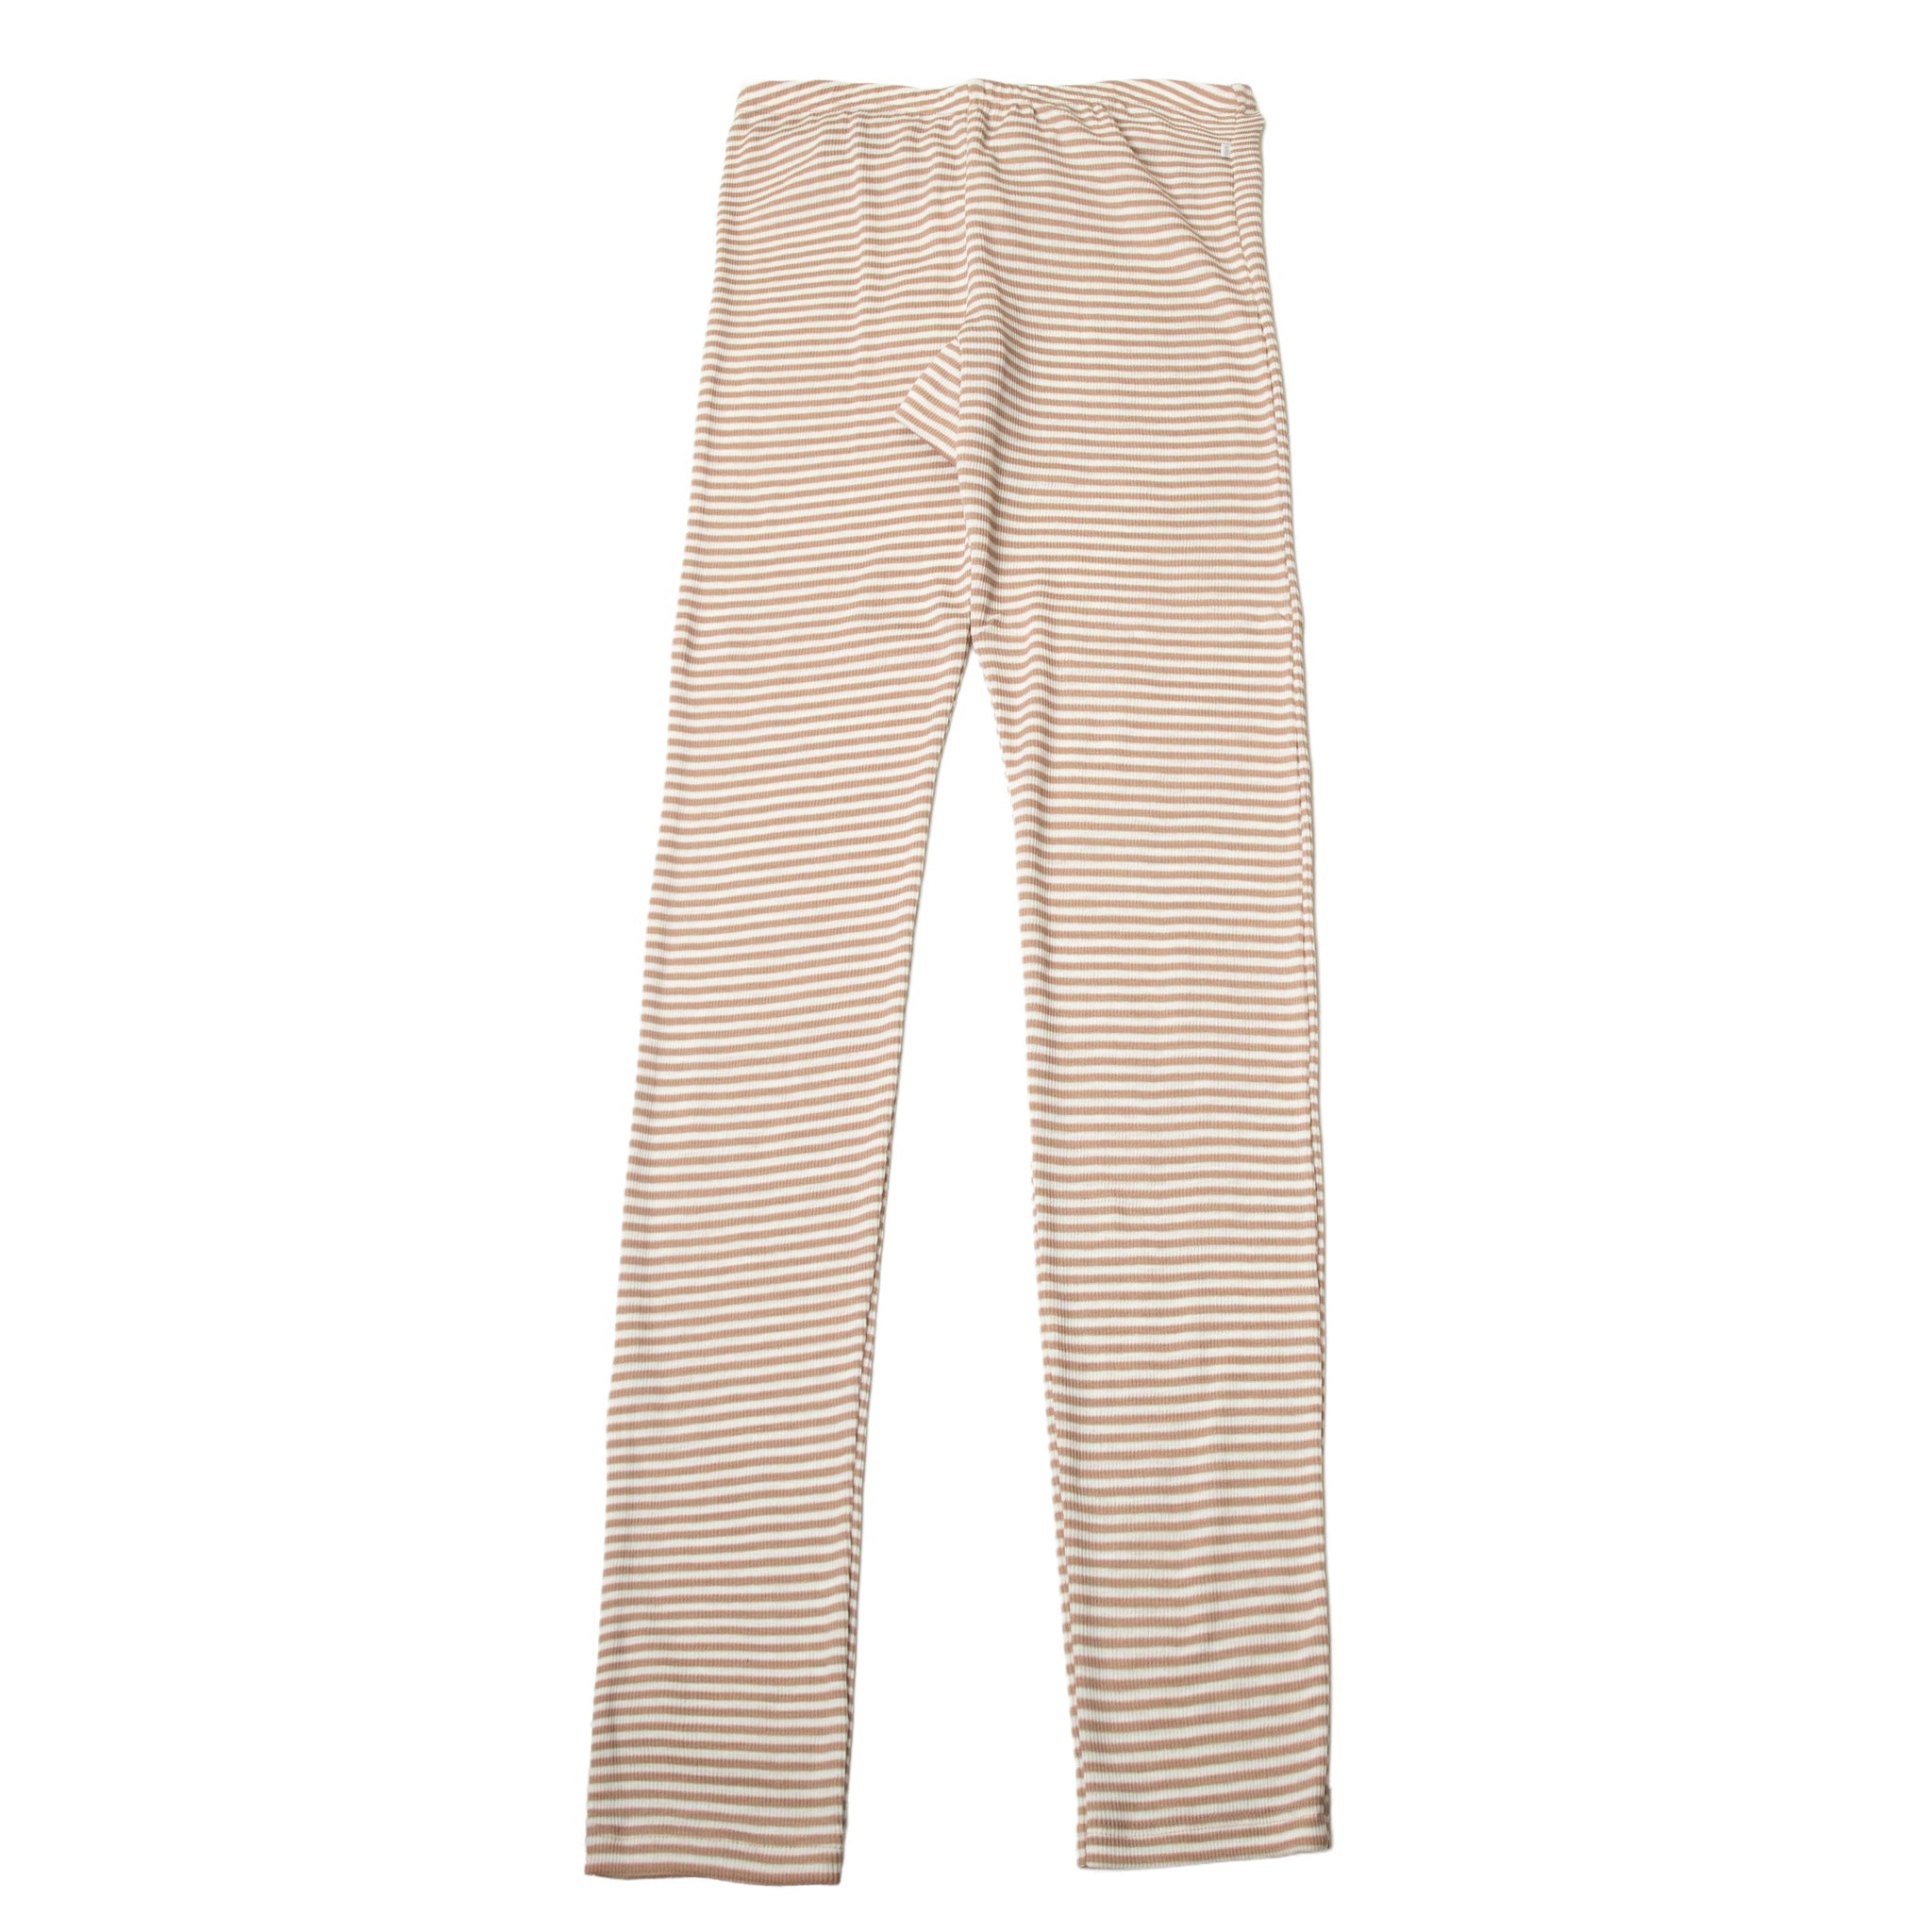 Joha Wolle Seide Leggings in soft mocca gestreift limited edition